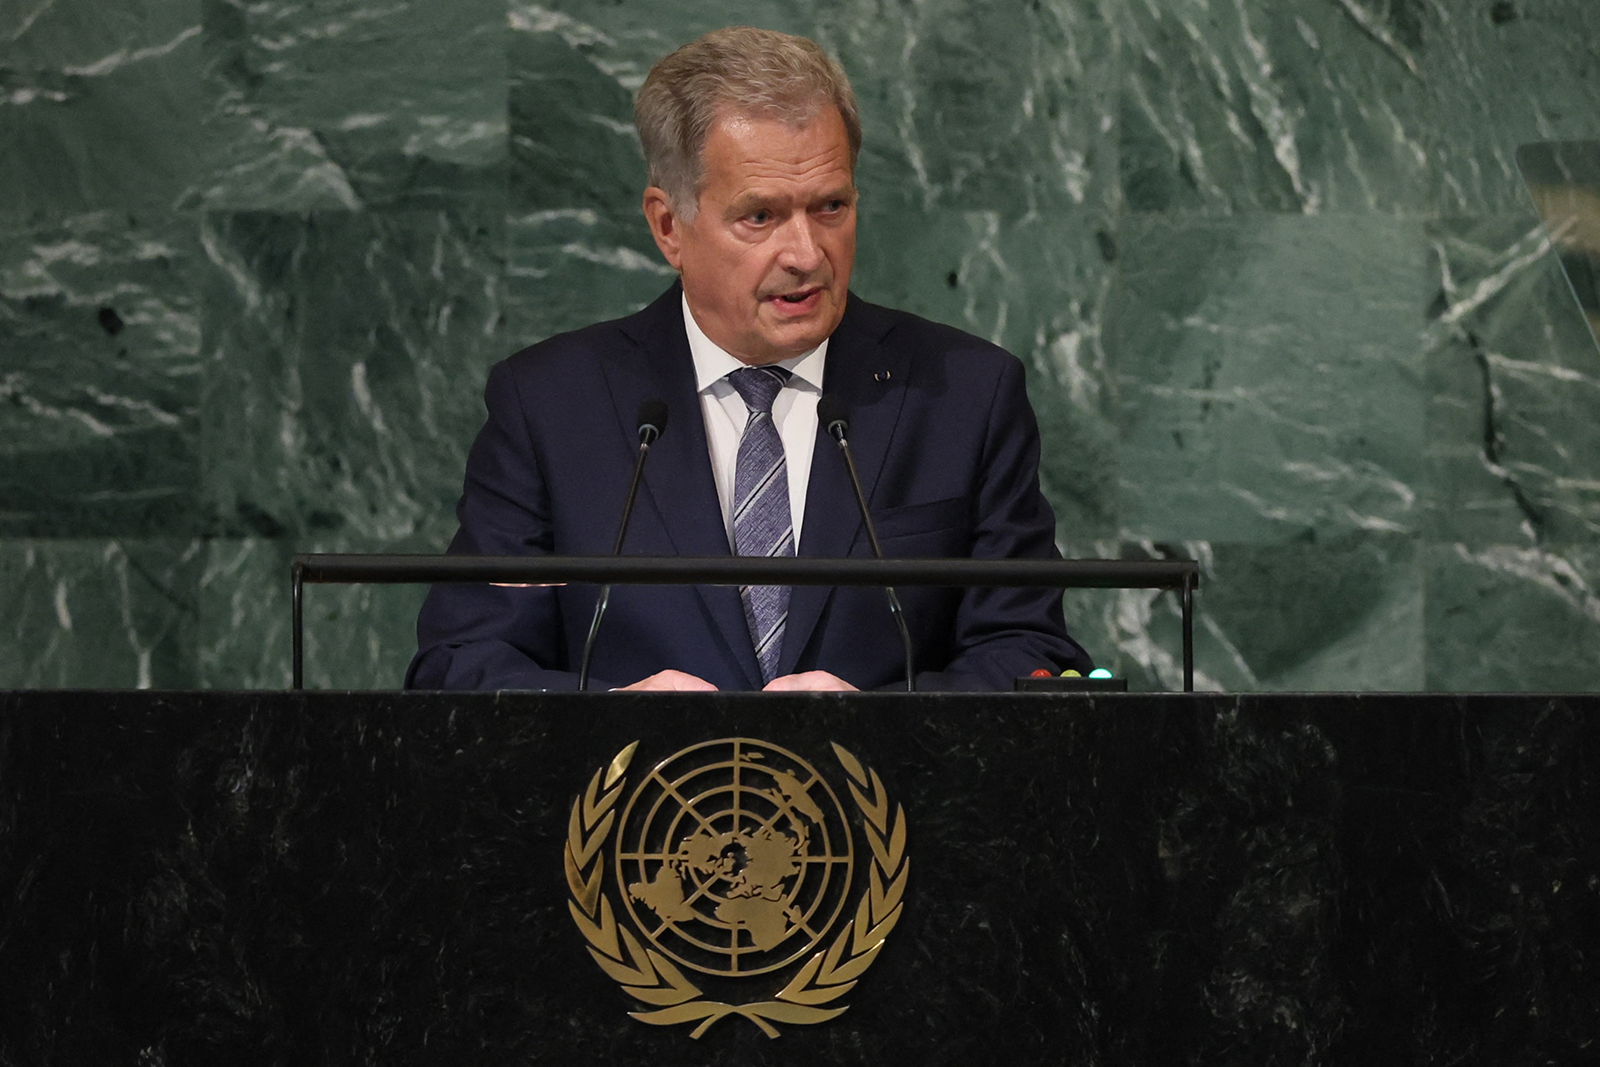 Finland's President Sauli Niinisto addresses the 77th Session of the United Nations General Assembly on Tuesday.